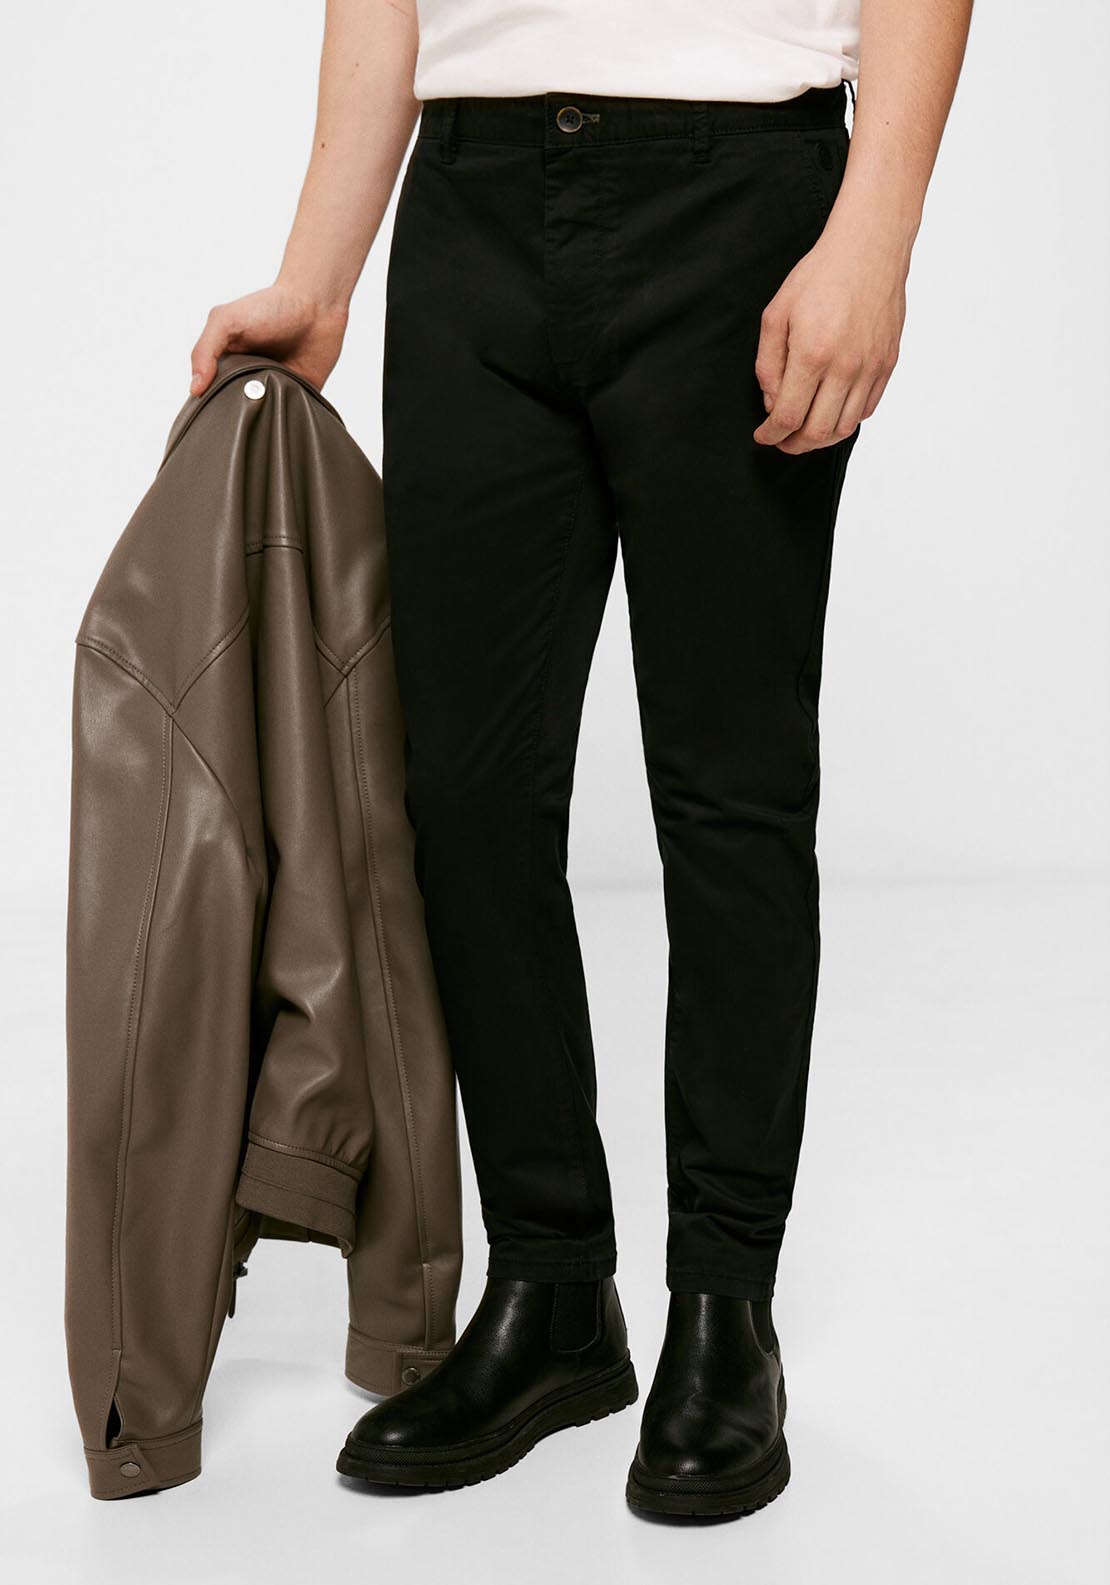 Springfield Skinny Basic Patterned Chino - Black 1 Shaws Department Stores